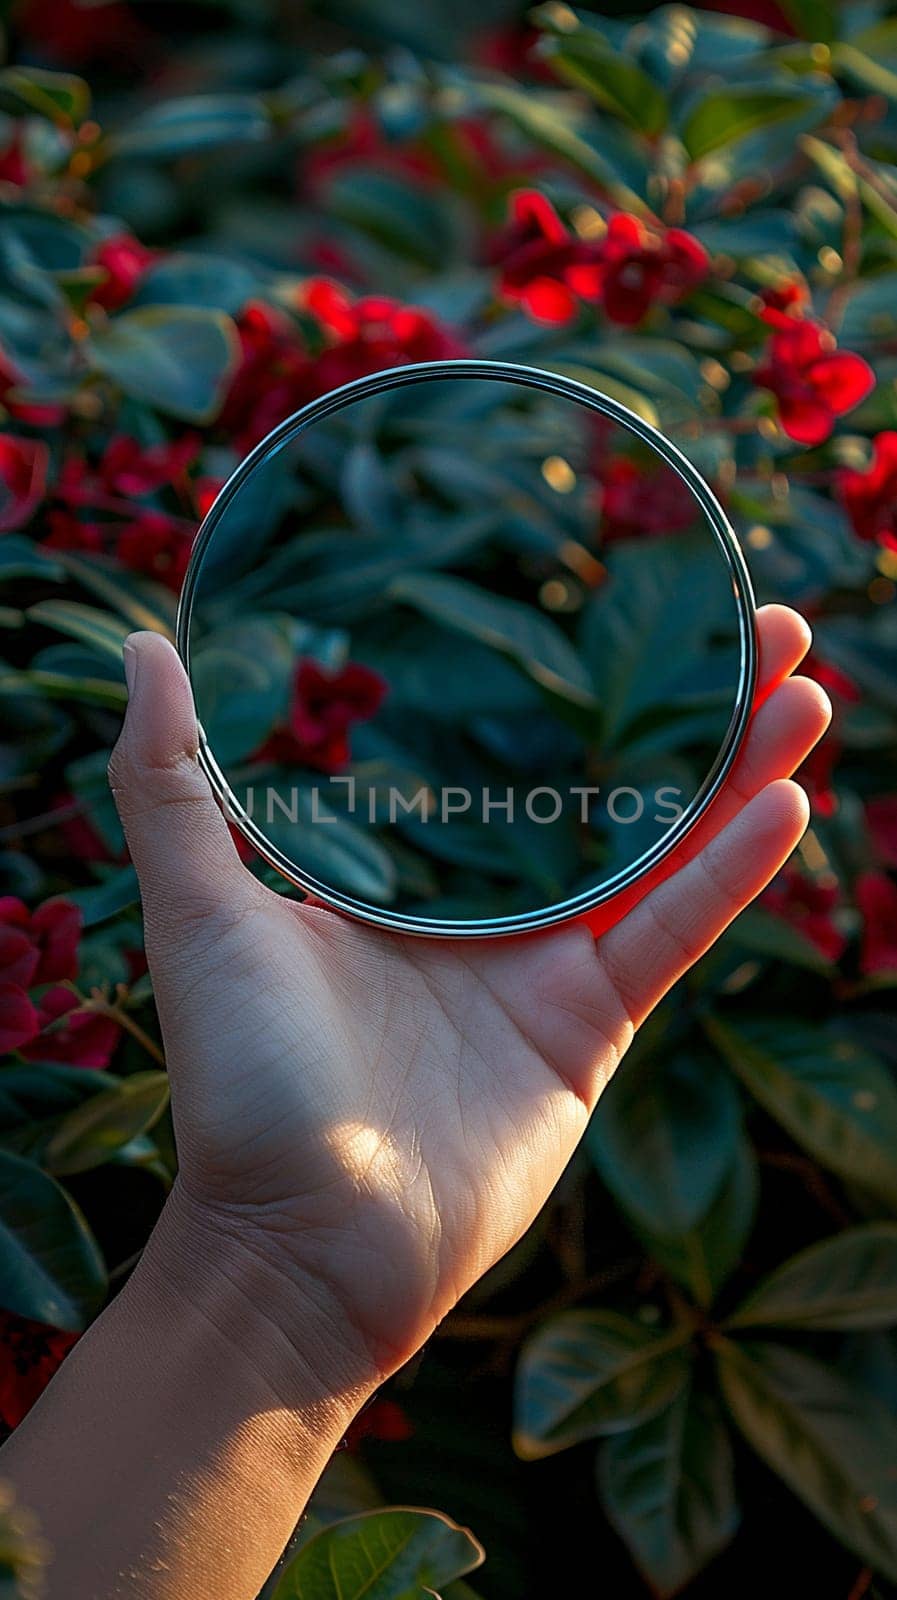 Hand holding a compact mirror, reflecting beauty and self-reflection.